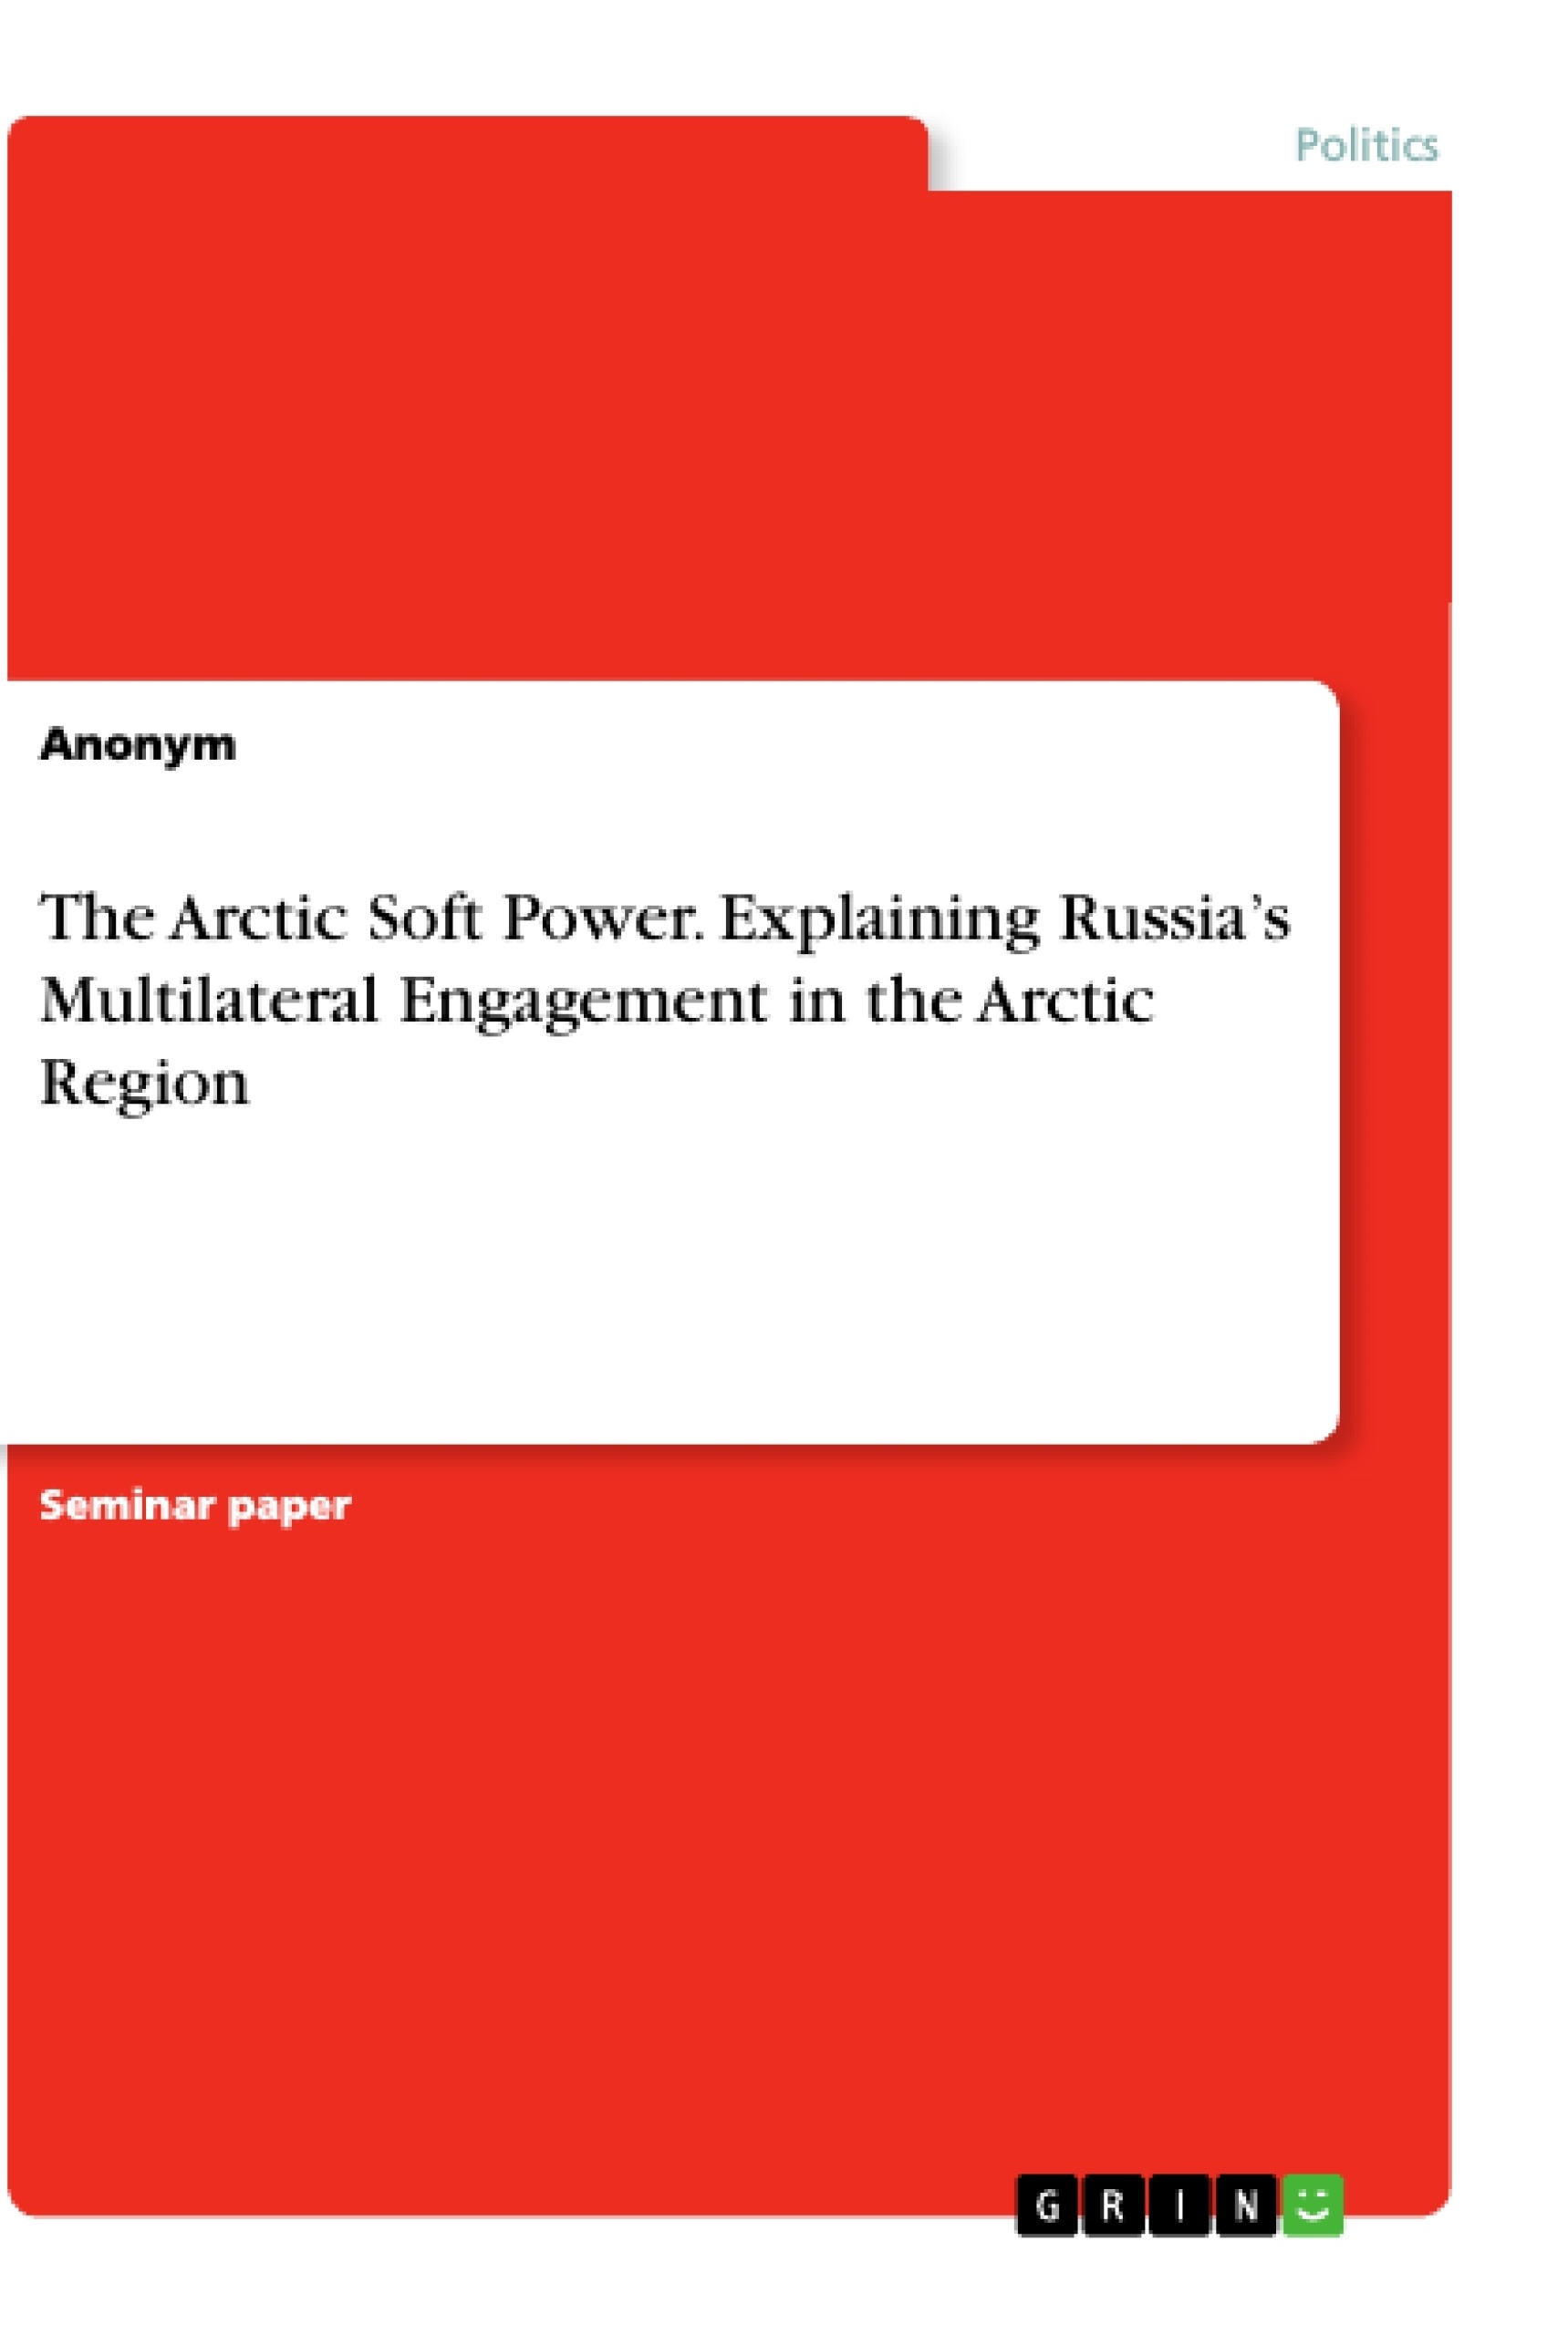 Titel: The Arctic Soft Power. Explaining Russia’s Multilateral Engagement in the Arctic Region